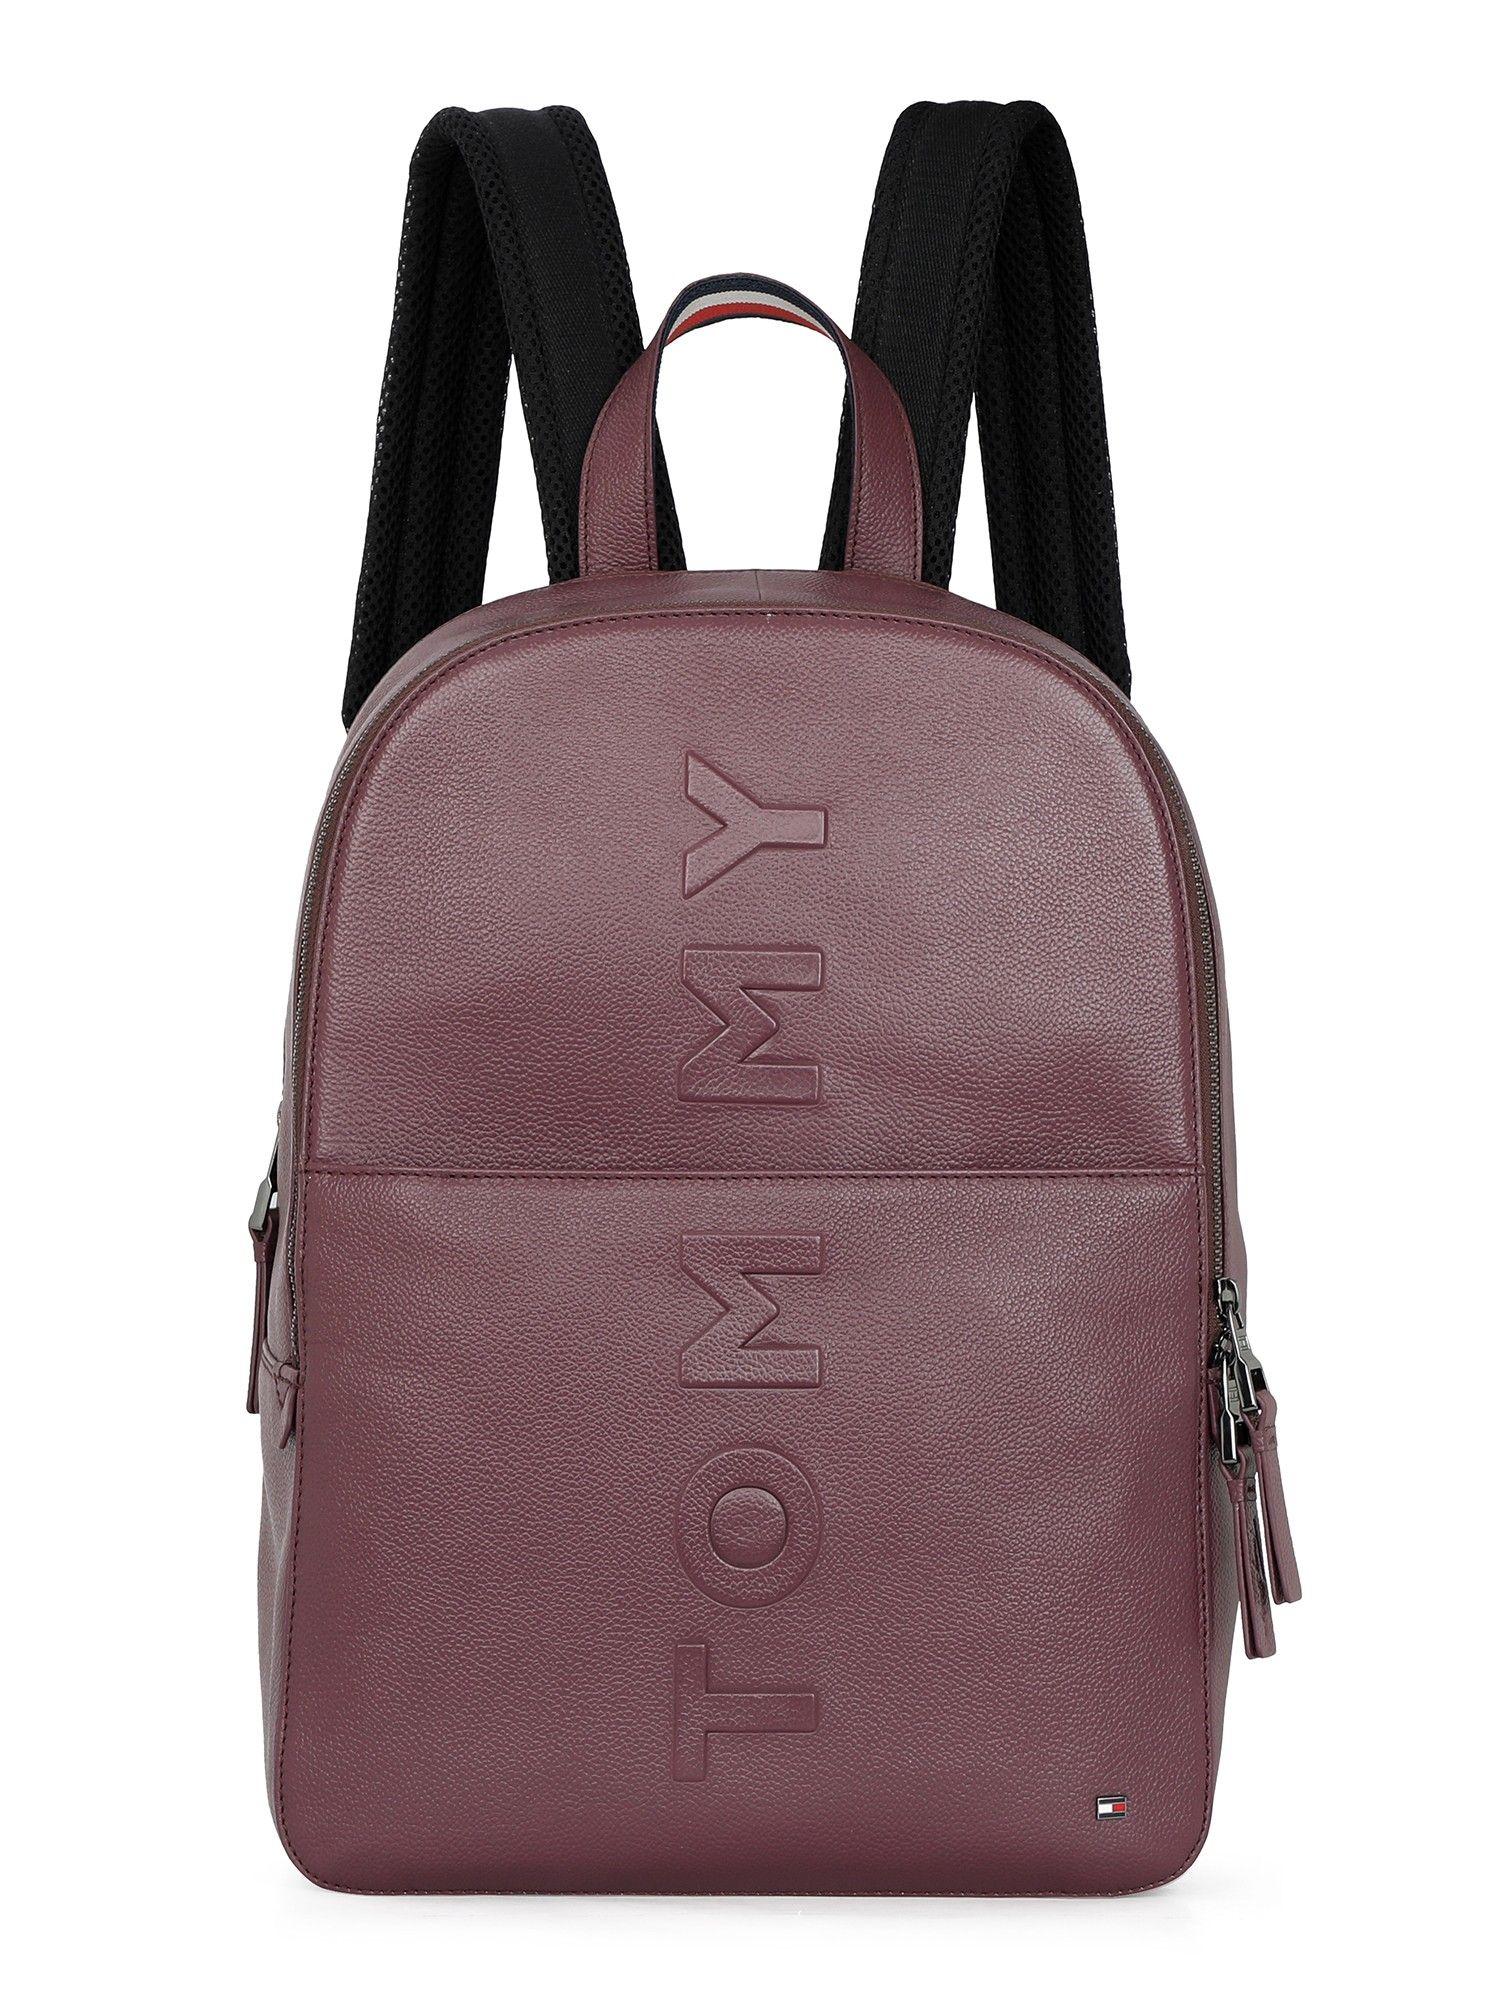 time-square laptop backpack textured maroon 8903496176179